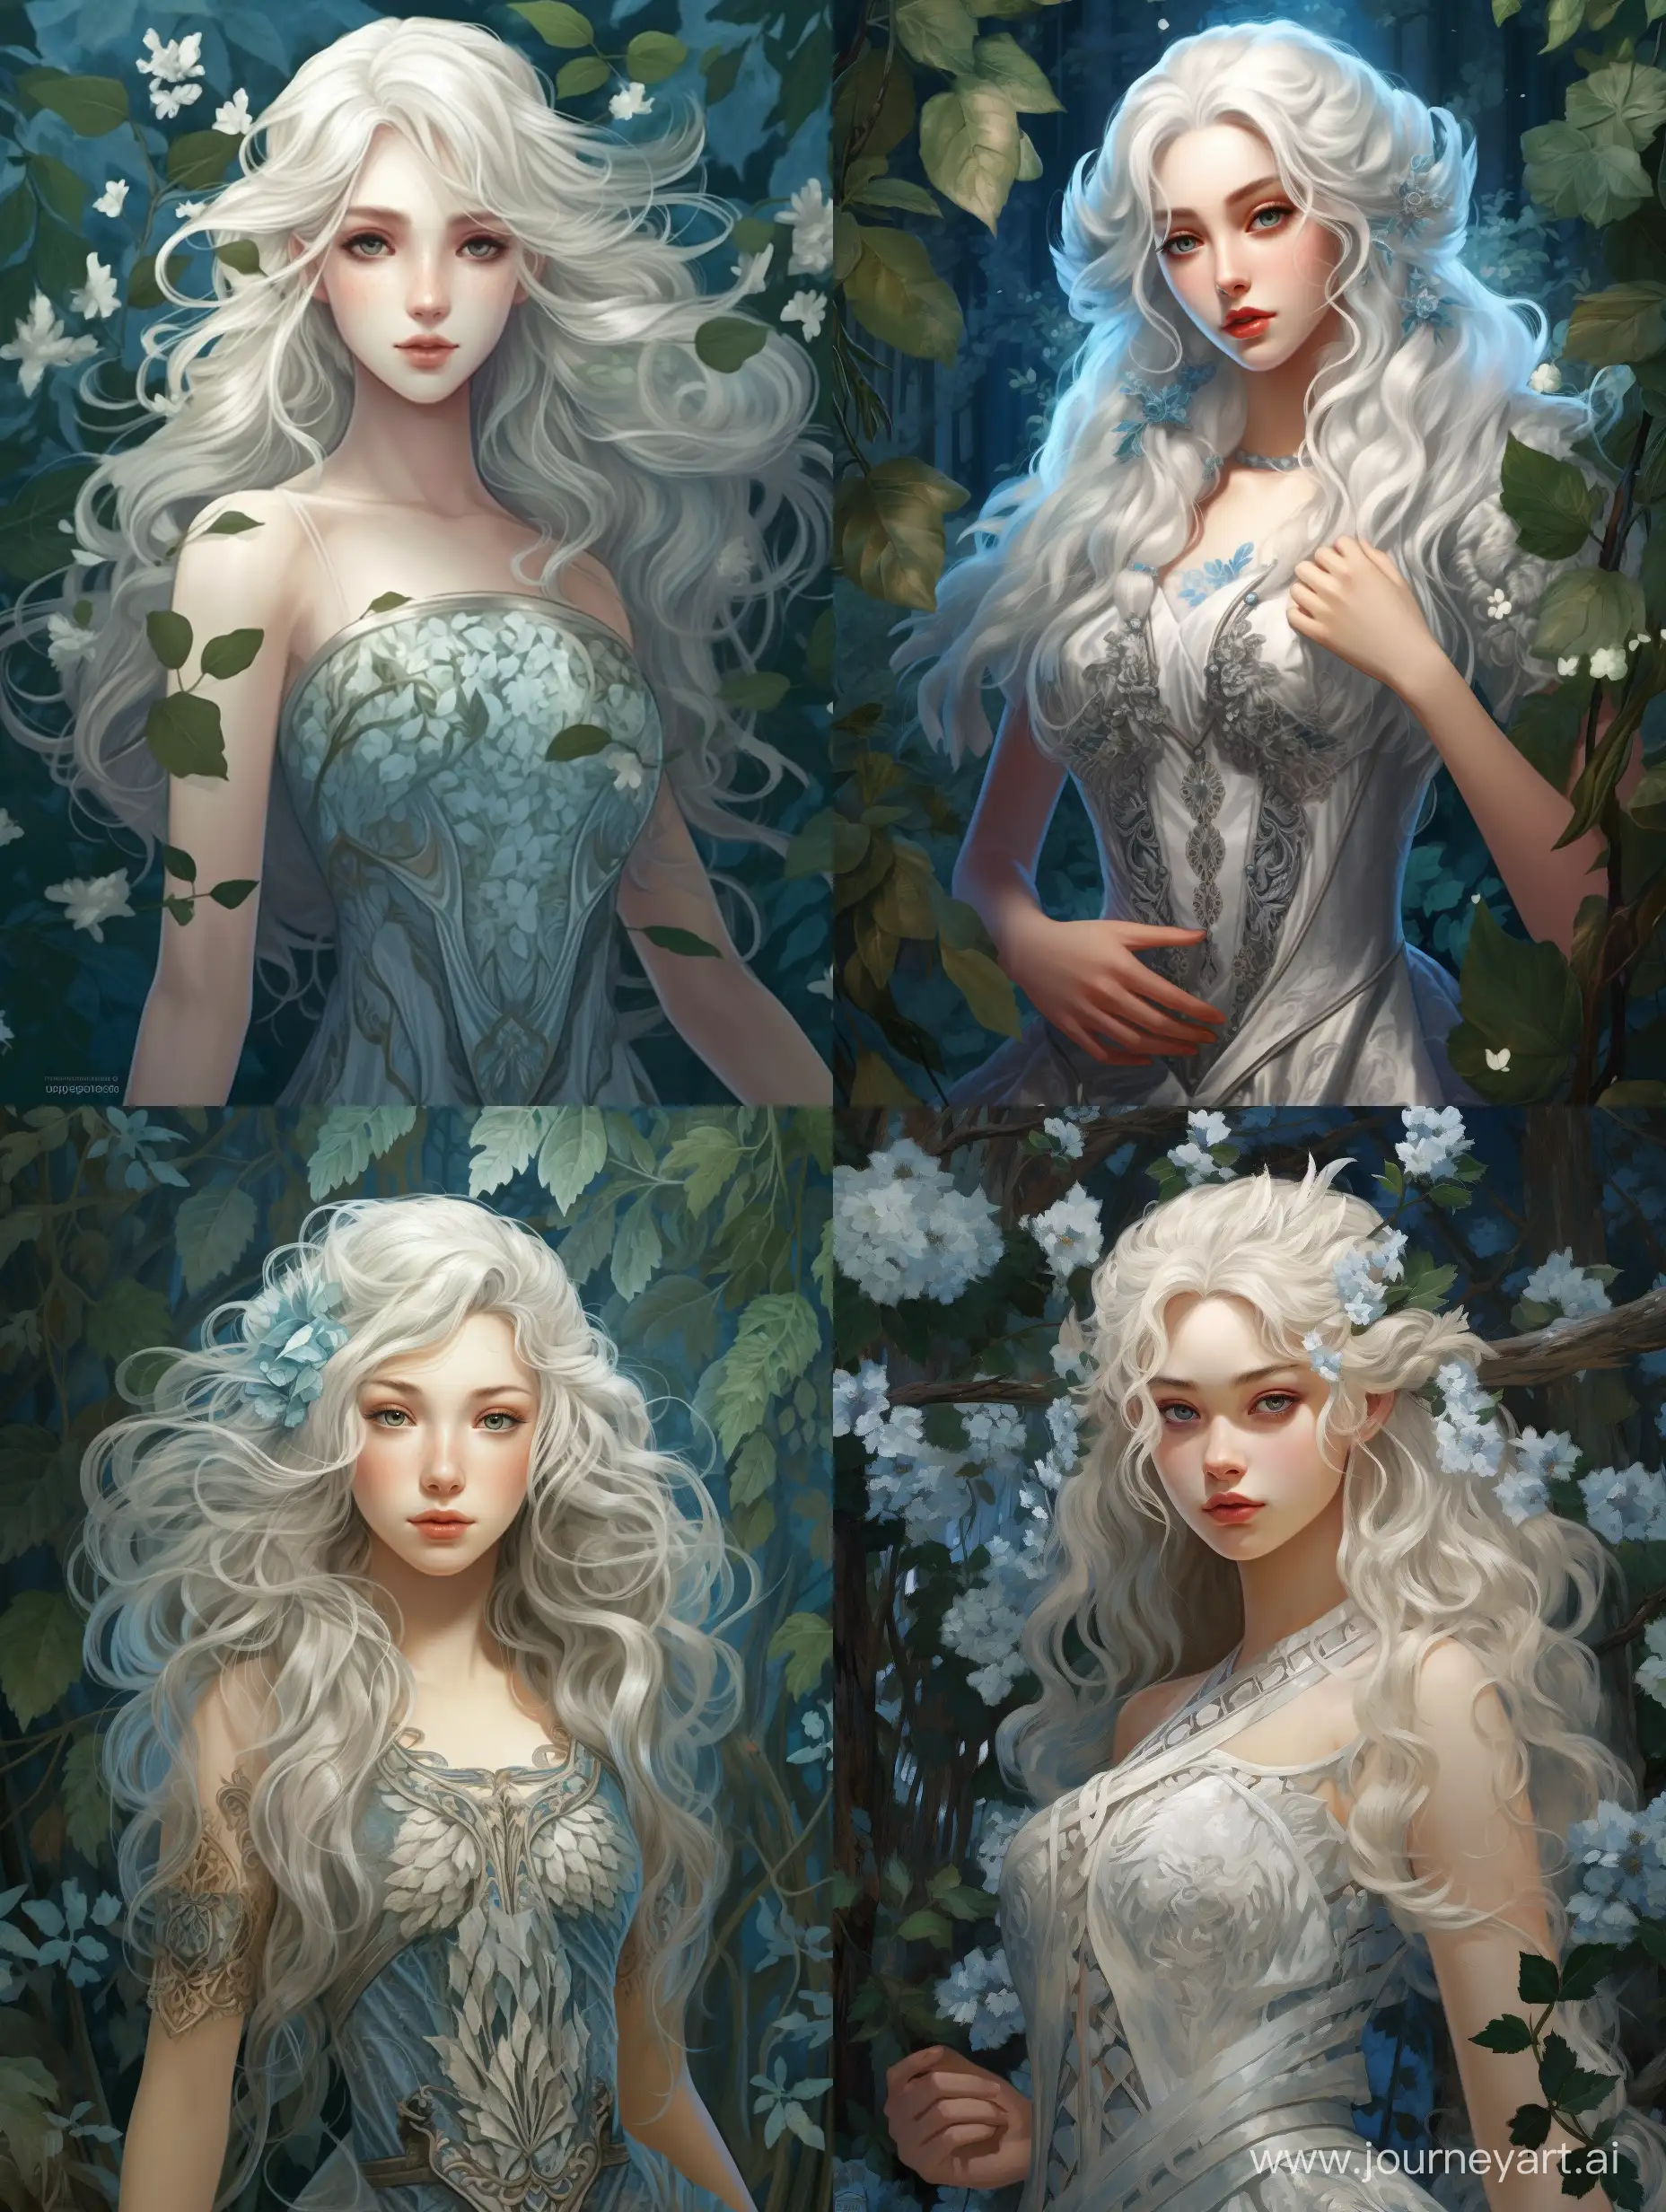 Young lady elf, fluffy white hair, blue eyes, wearing dress made of plants, blue leaves and white wood, fantasy celtic style